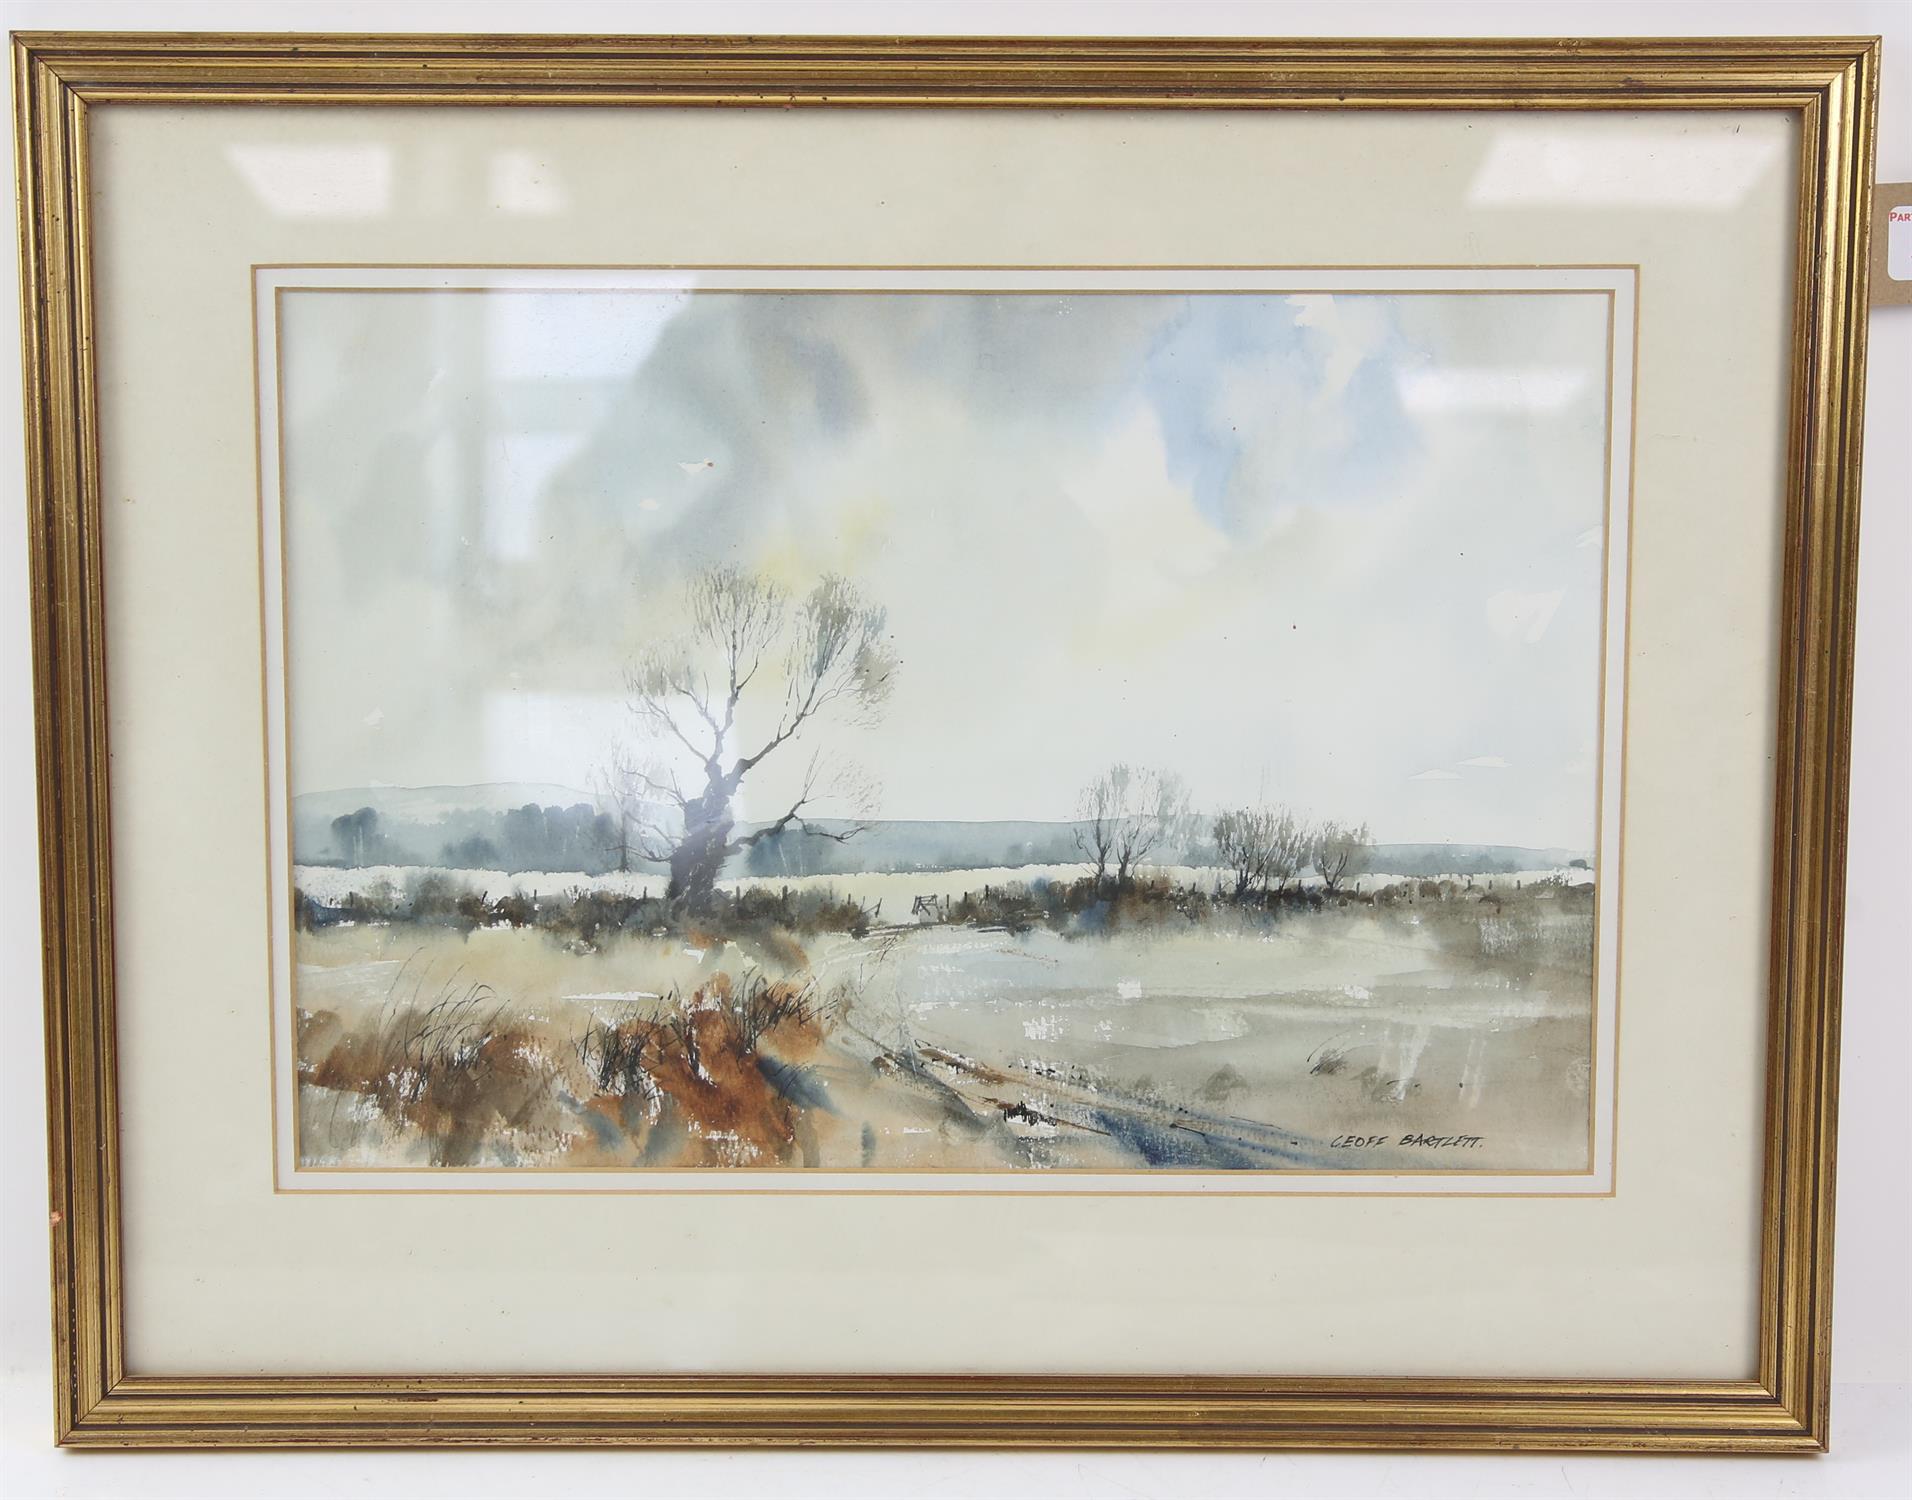 Geoff Bartlett (British), winter landscape. Watercolour. Signed lower right. Framed and glazed. - Image 2 of 2